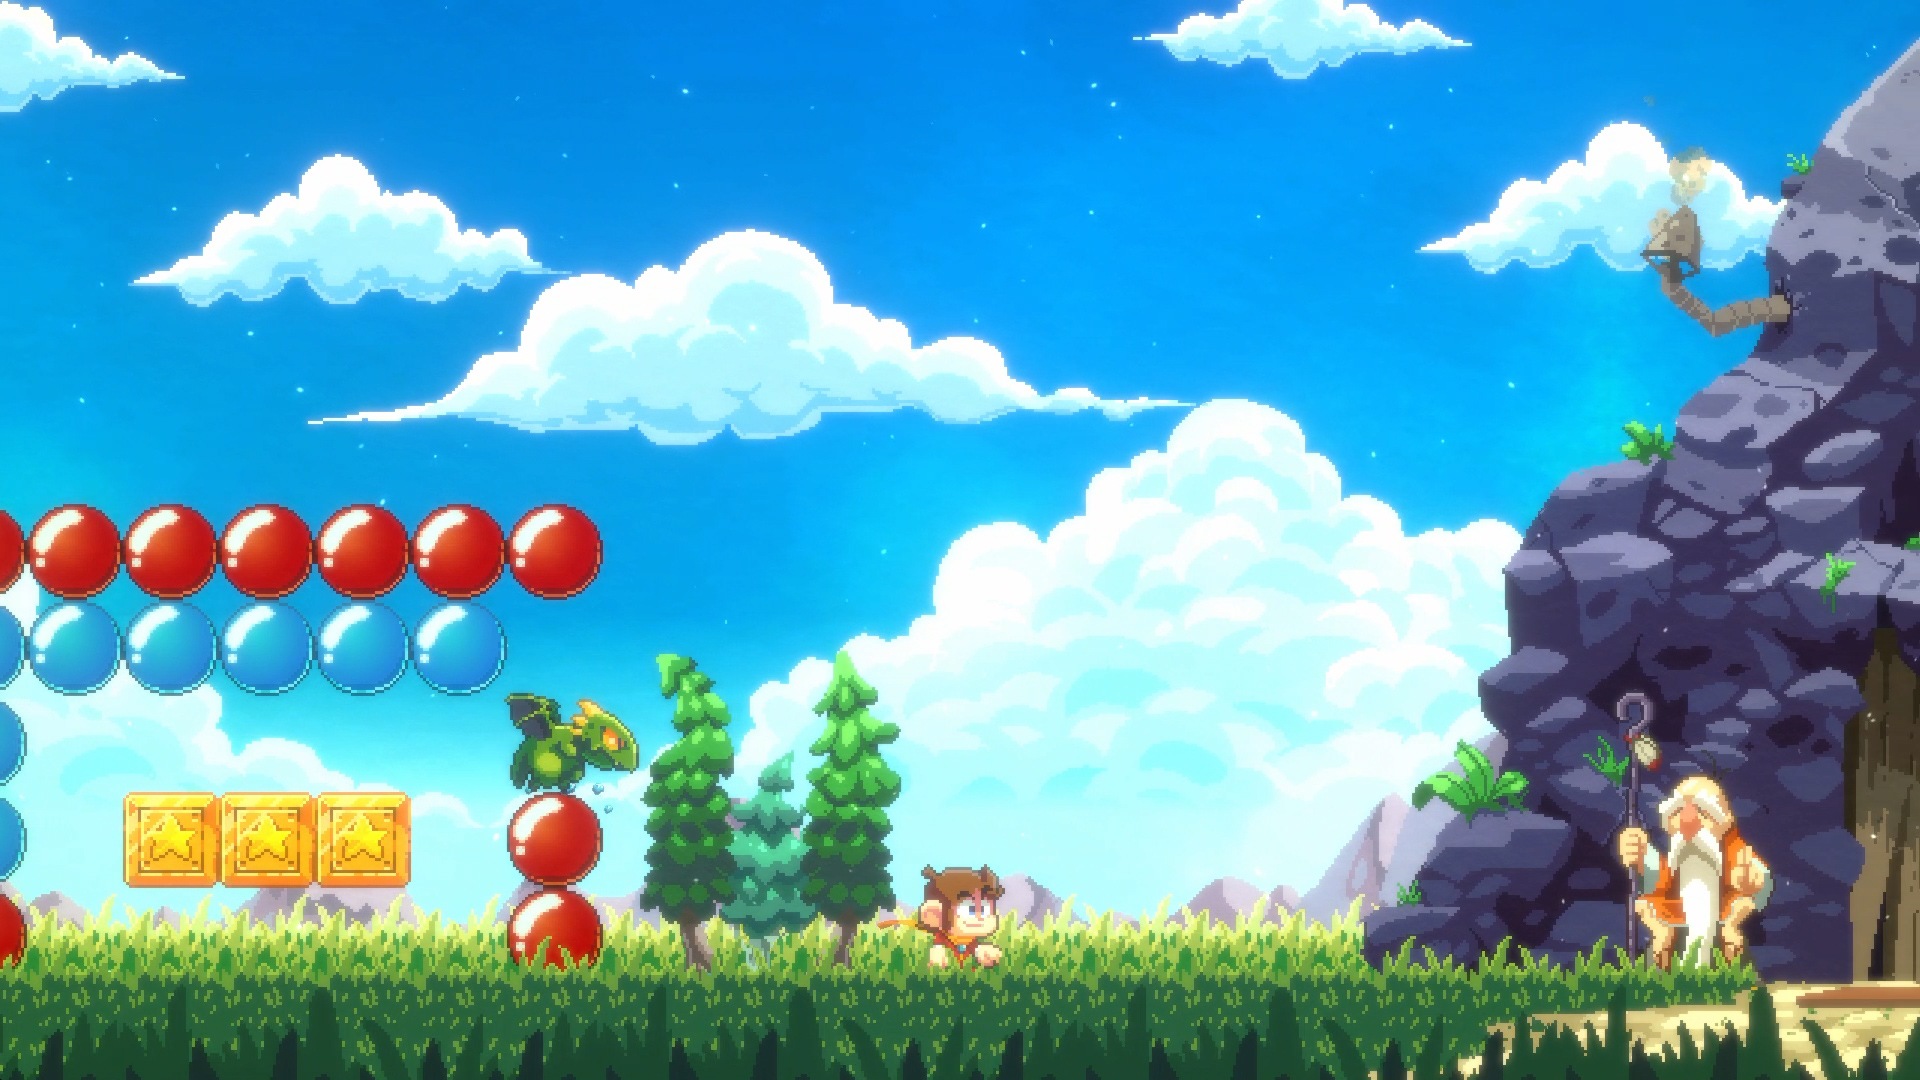 PlayStation 4 Spielesoftware »Alex Kidd in Miracle World DX«, PlayStation 4